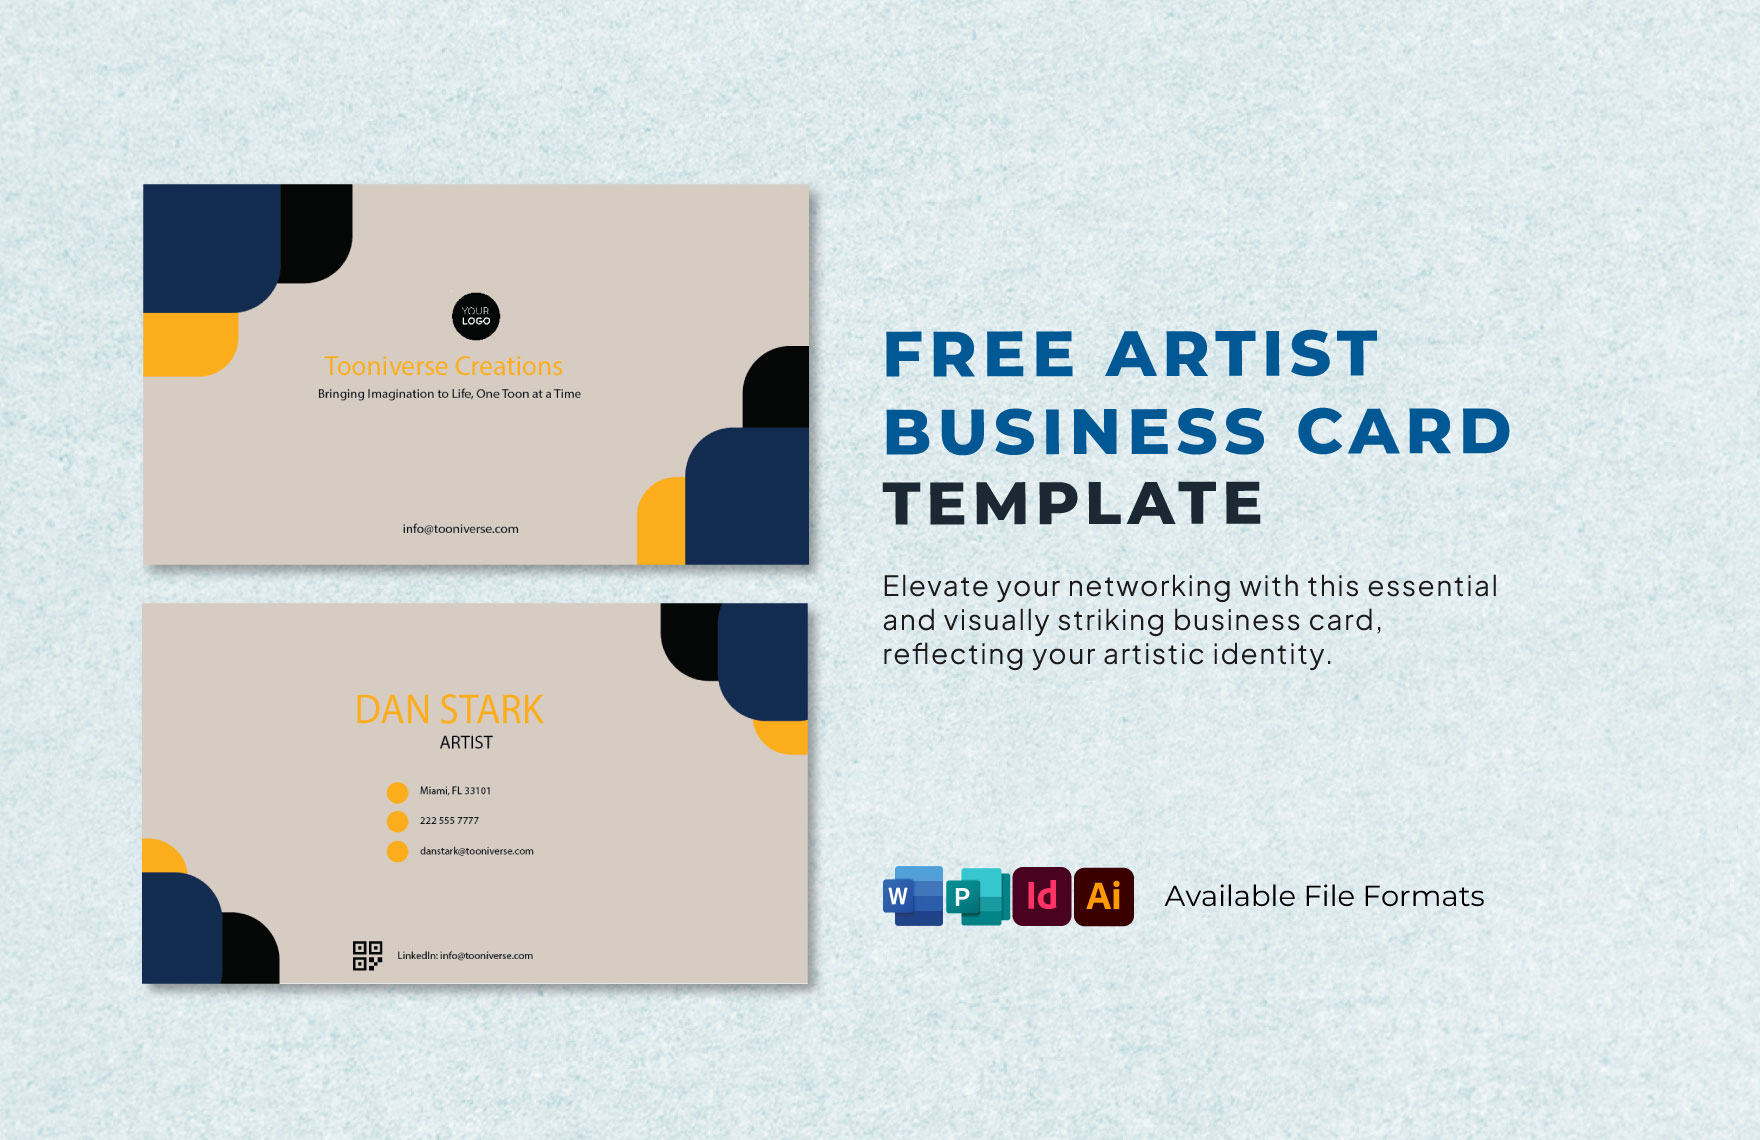 Free  Artist Business Card Template in Word, Illustrator, Publisher, InDesign